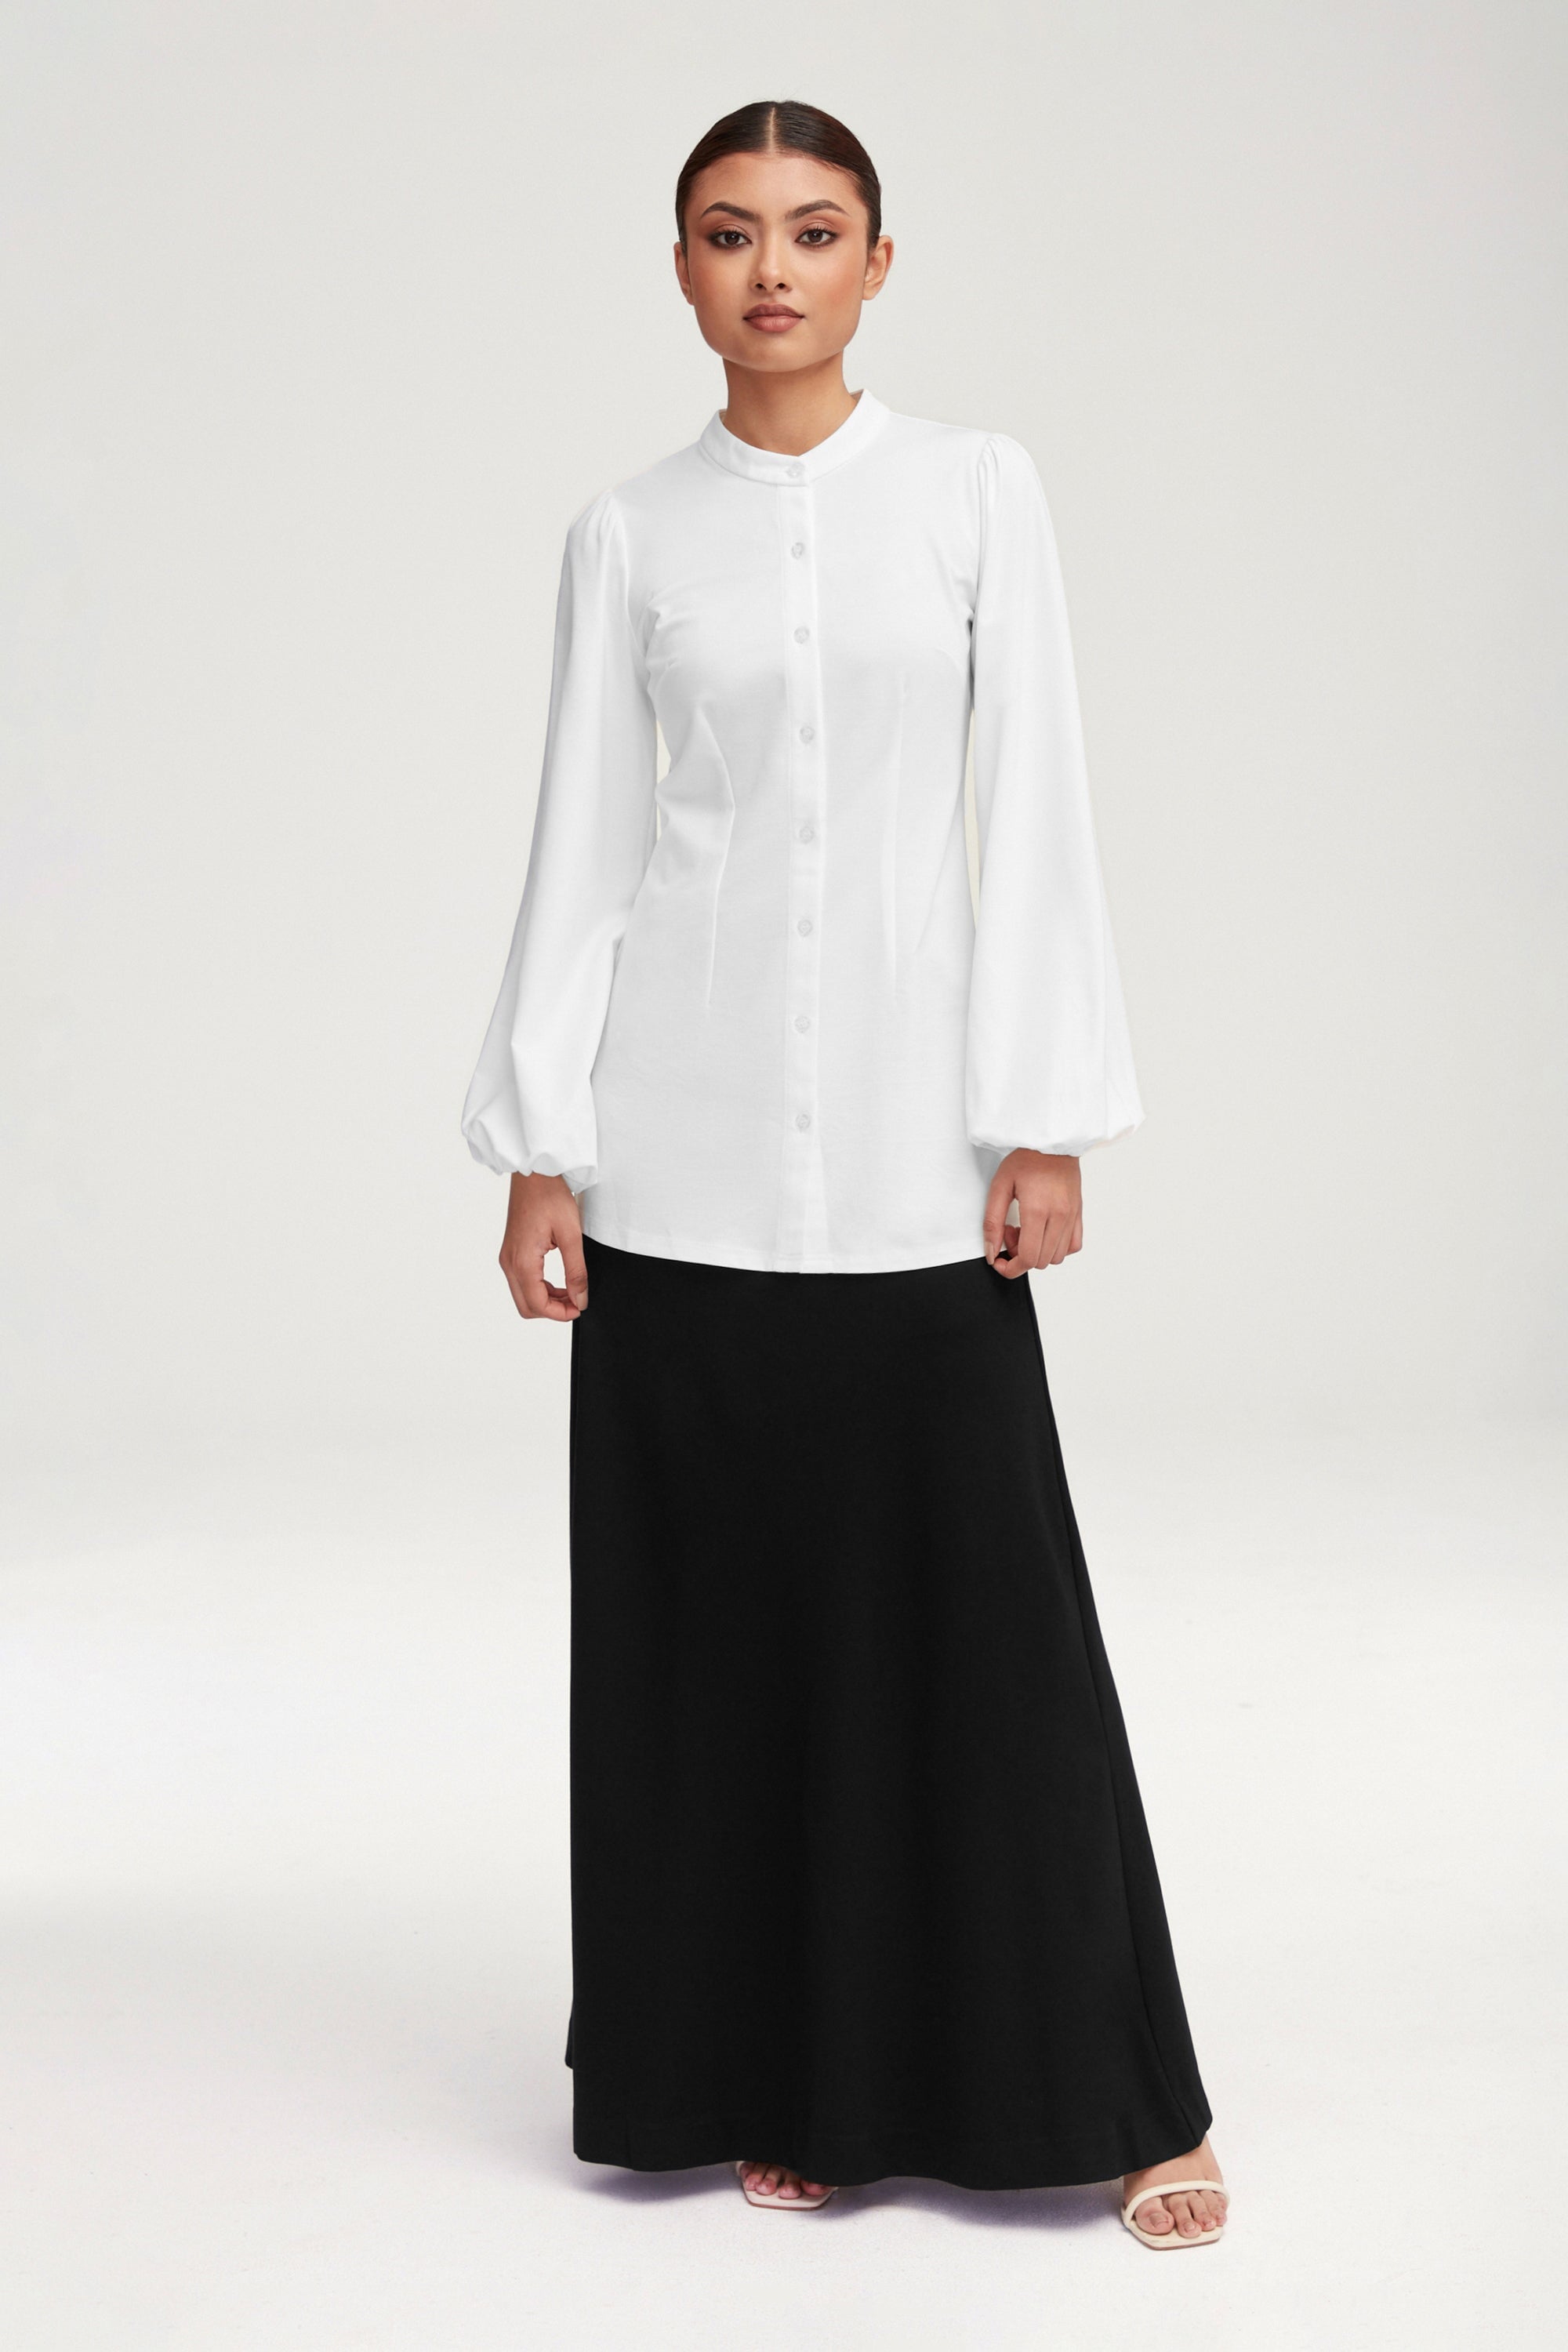 Rayana Jersey Button Down Top - White Clothing Veiled 